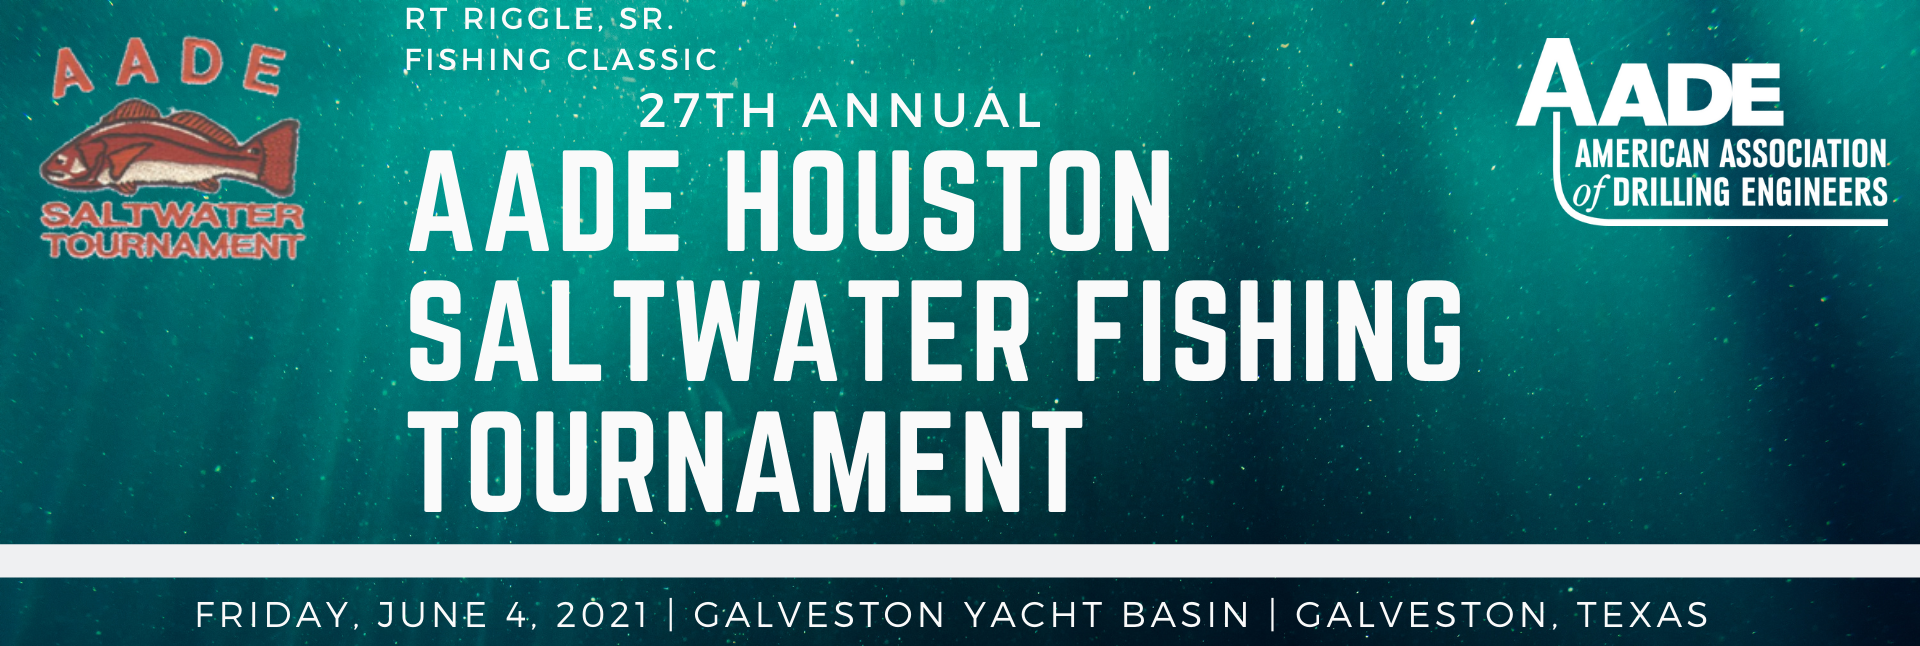 AADE HOUSTON SALTWATER Fishing TOURNAMENT cropped.png